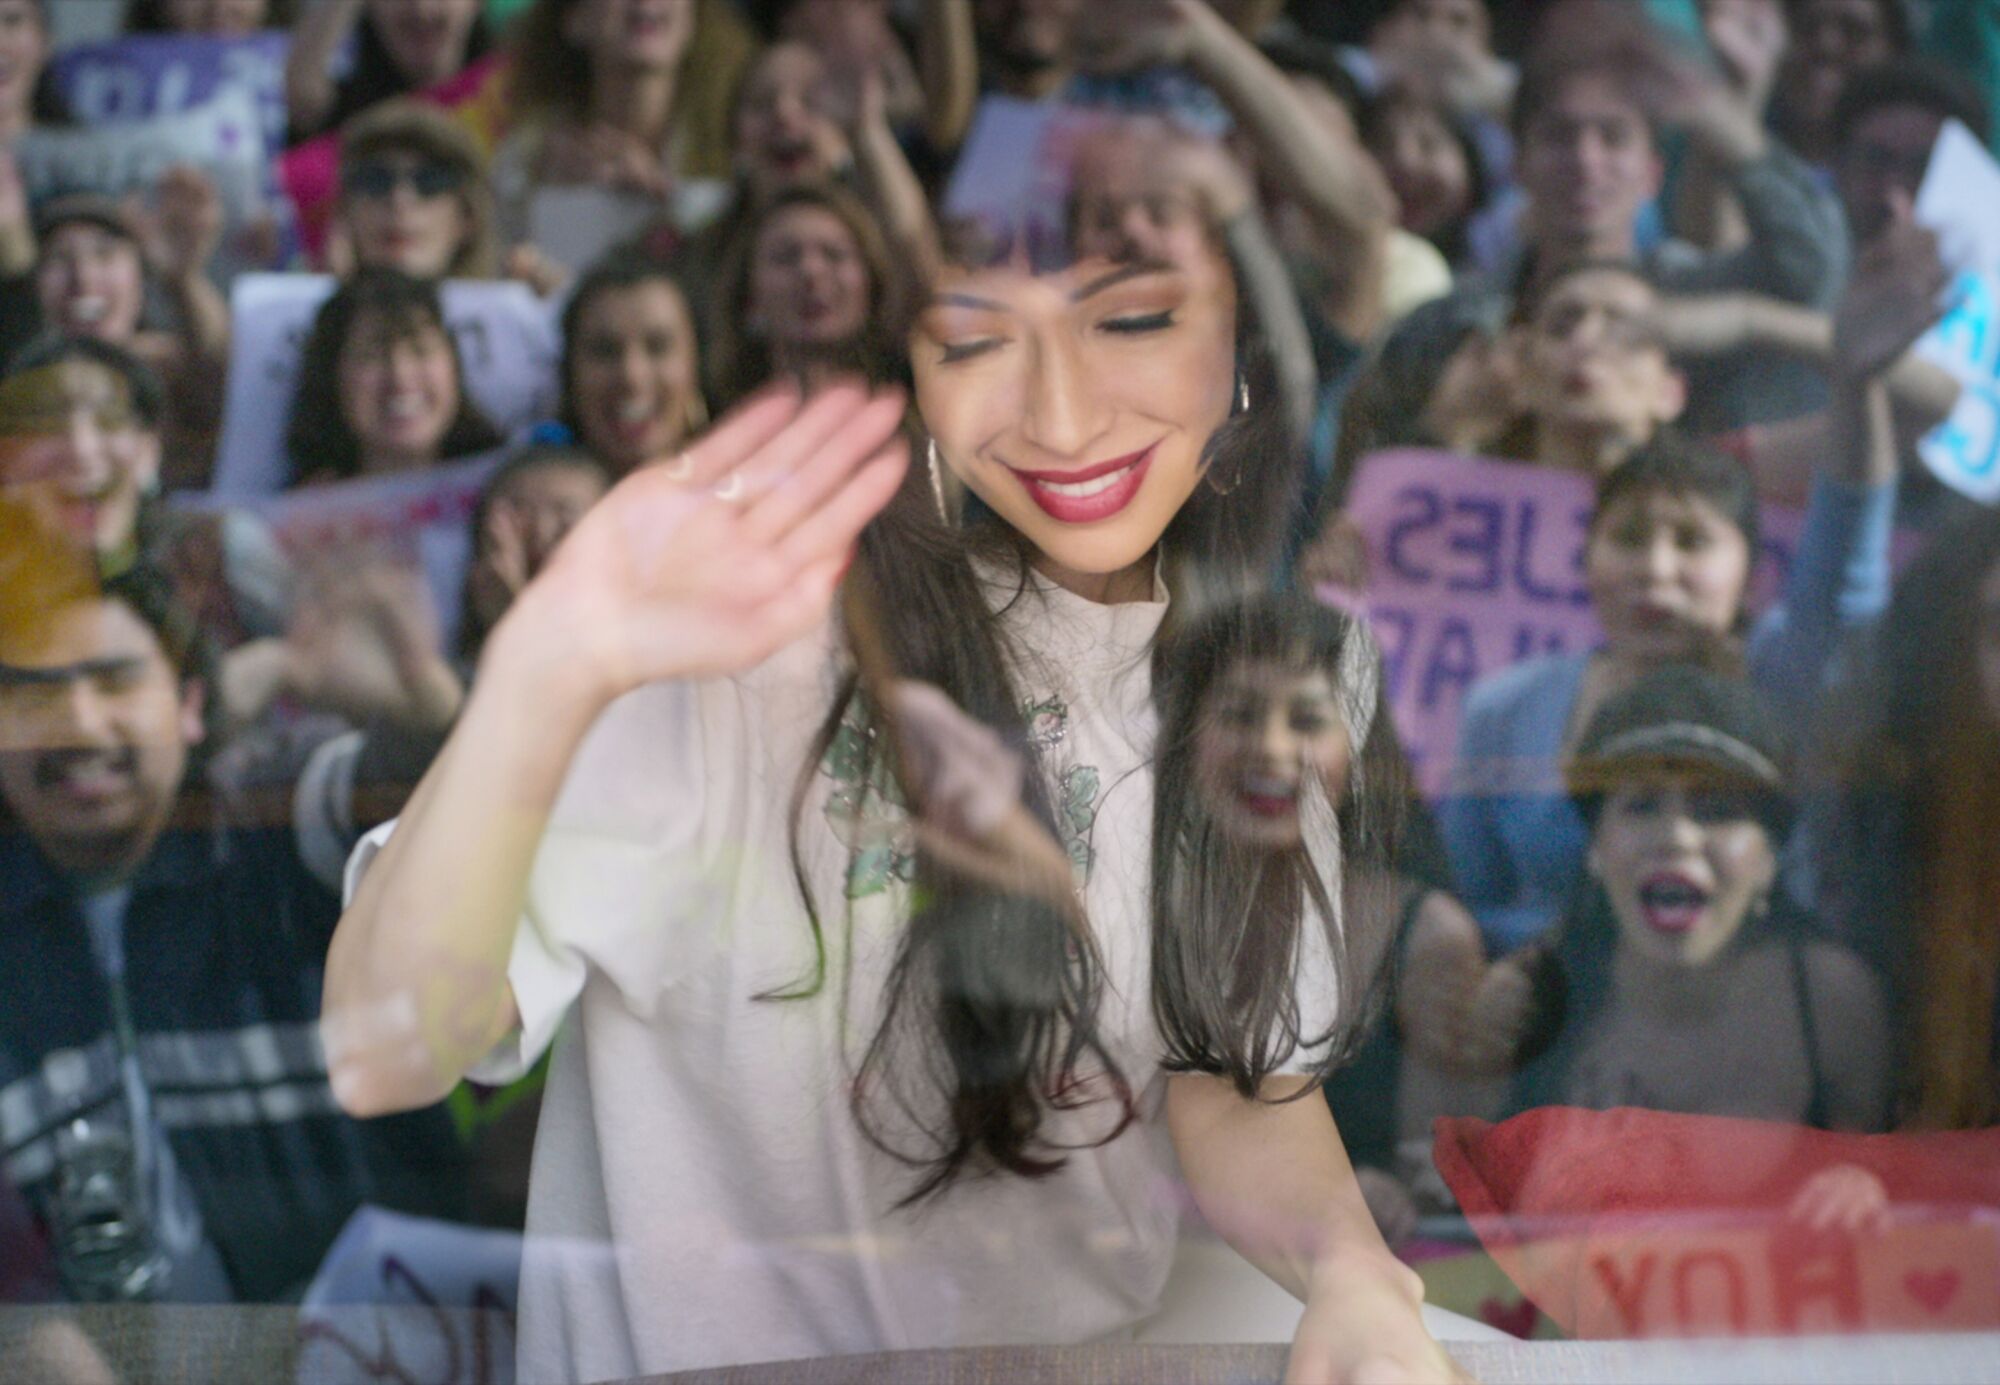 Christian Serratos, as Selena, waves to fans, who are reflected in a window.